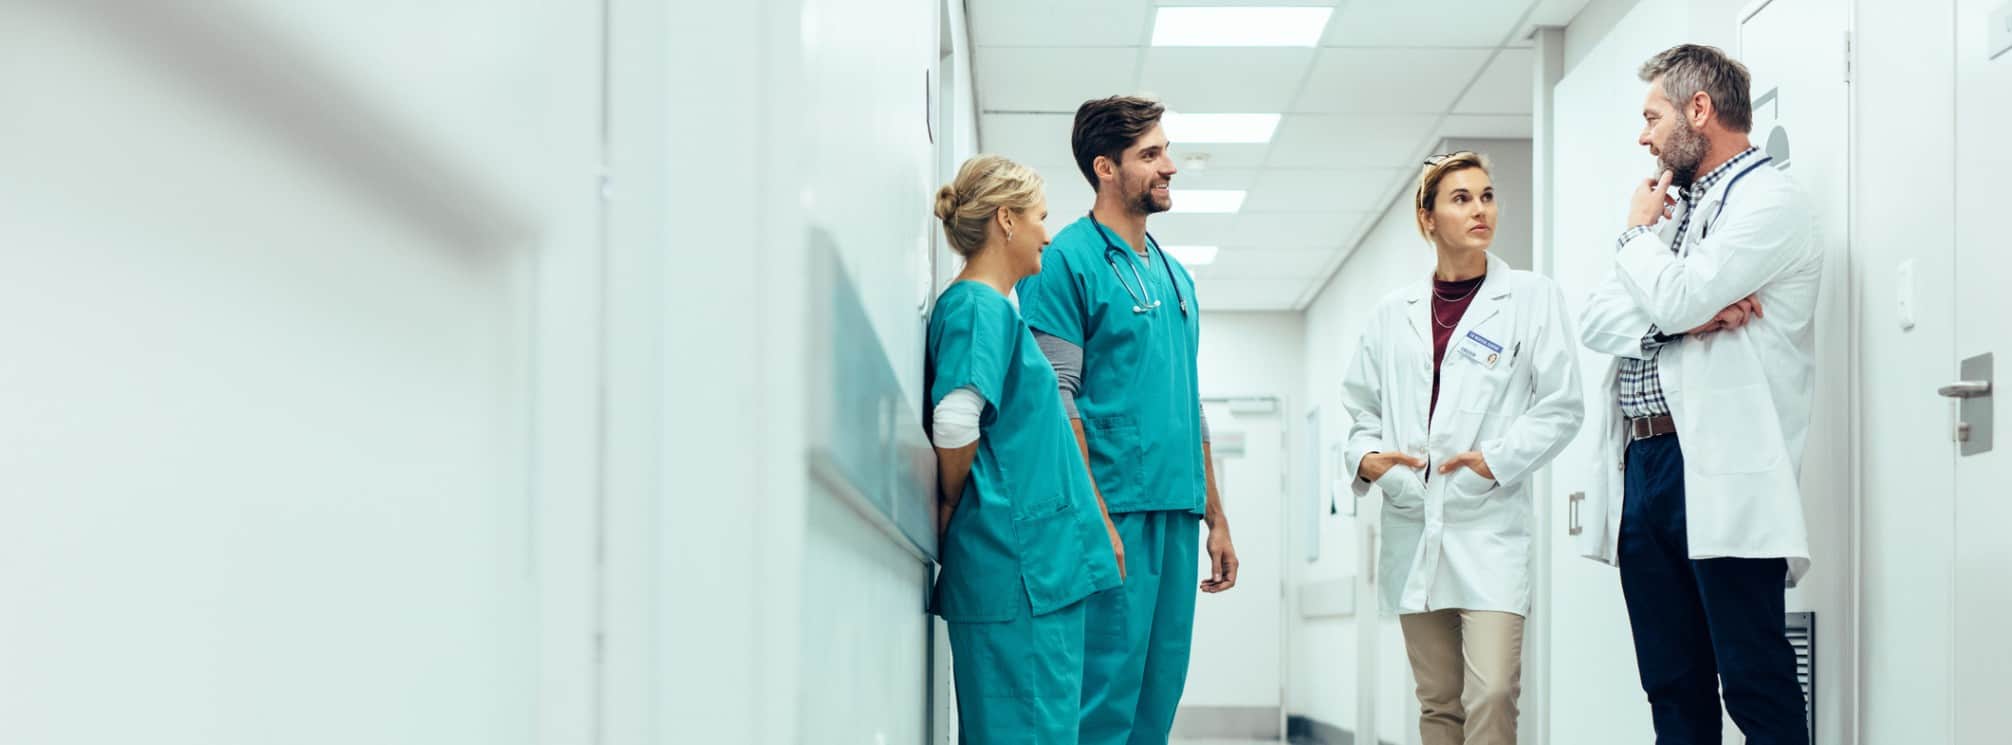 physician leading a team huddle with his hospital staff